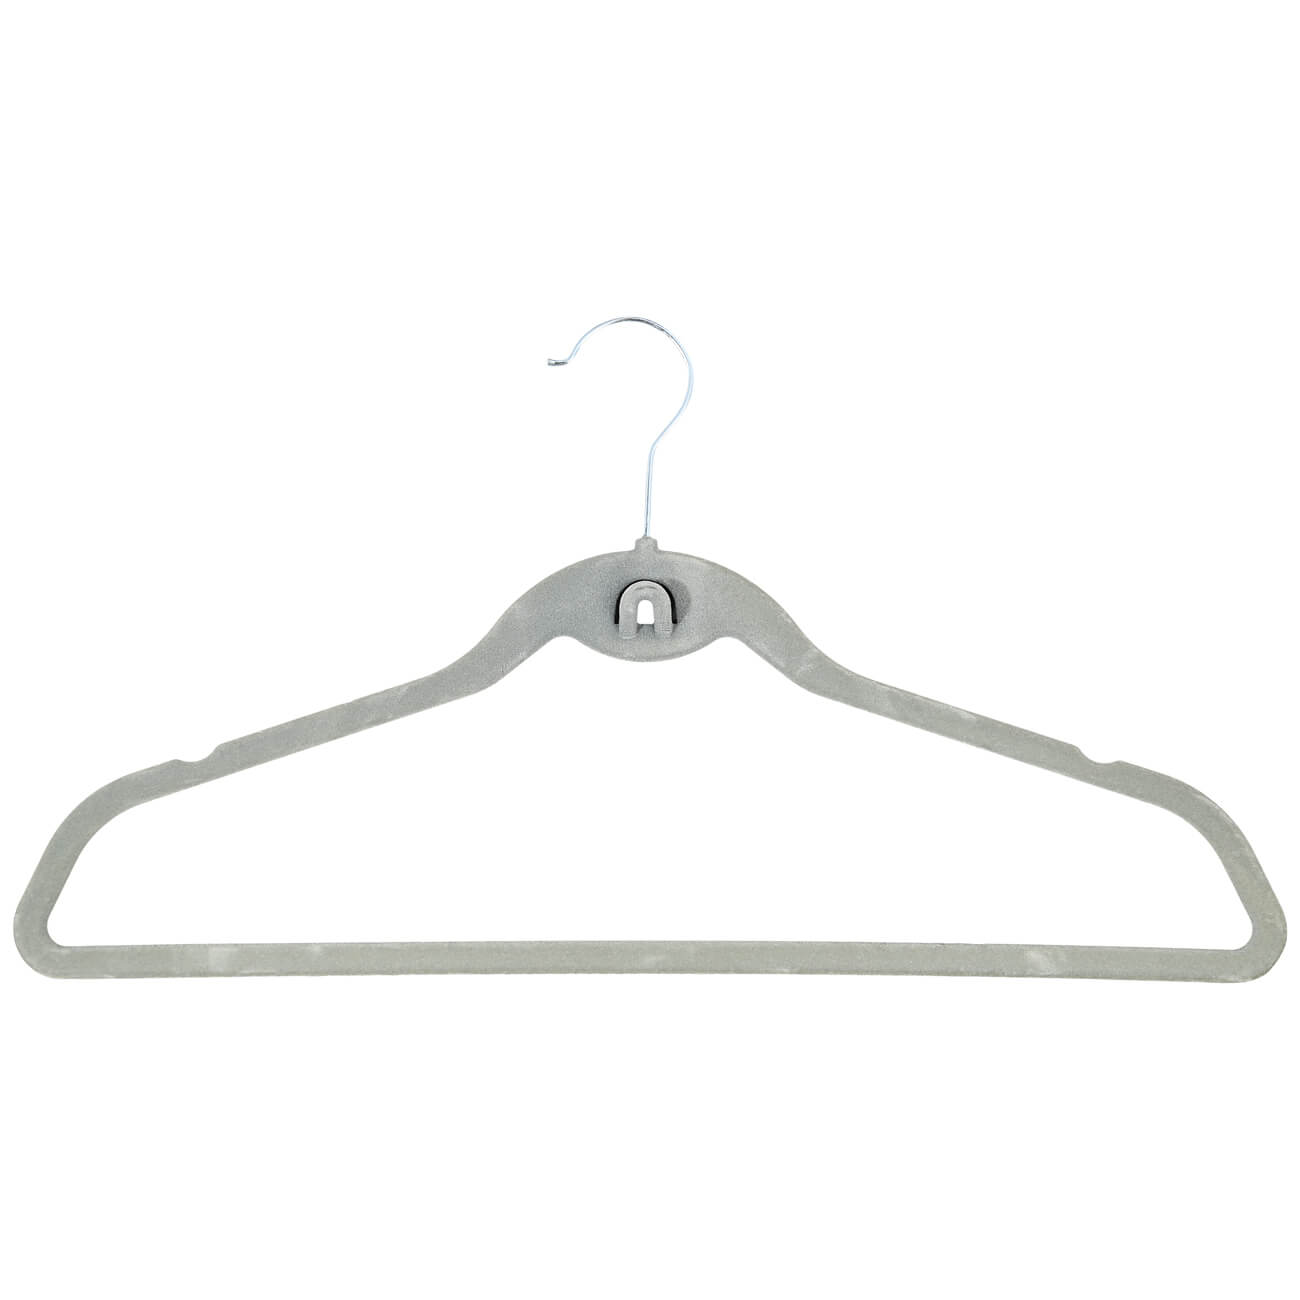 Hanger-hangers, 44 cm, 4 pcs, with a loop for the second hangers, flock, gray, Household изображение № 1